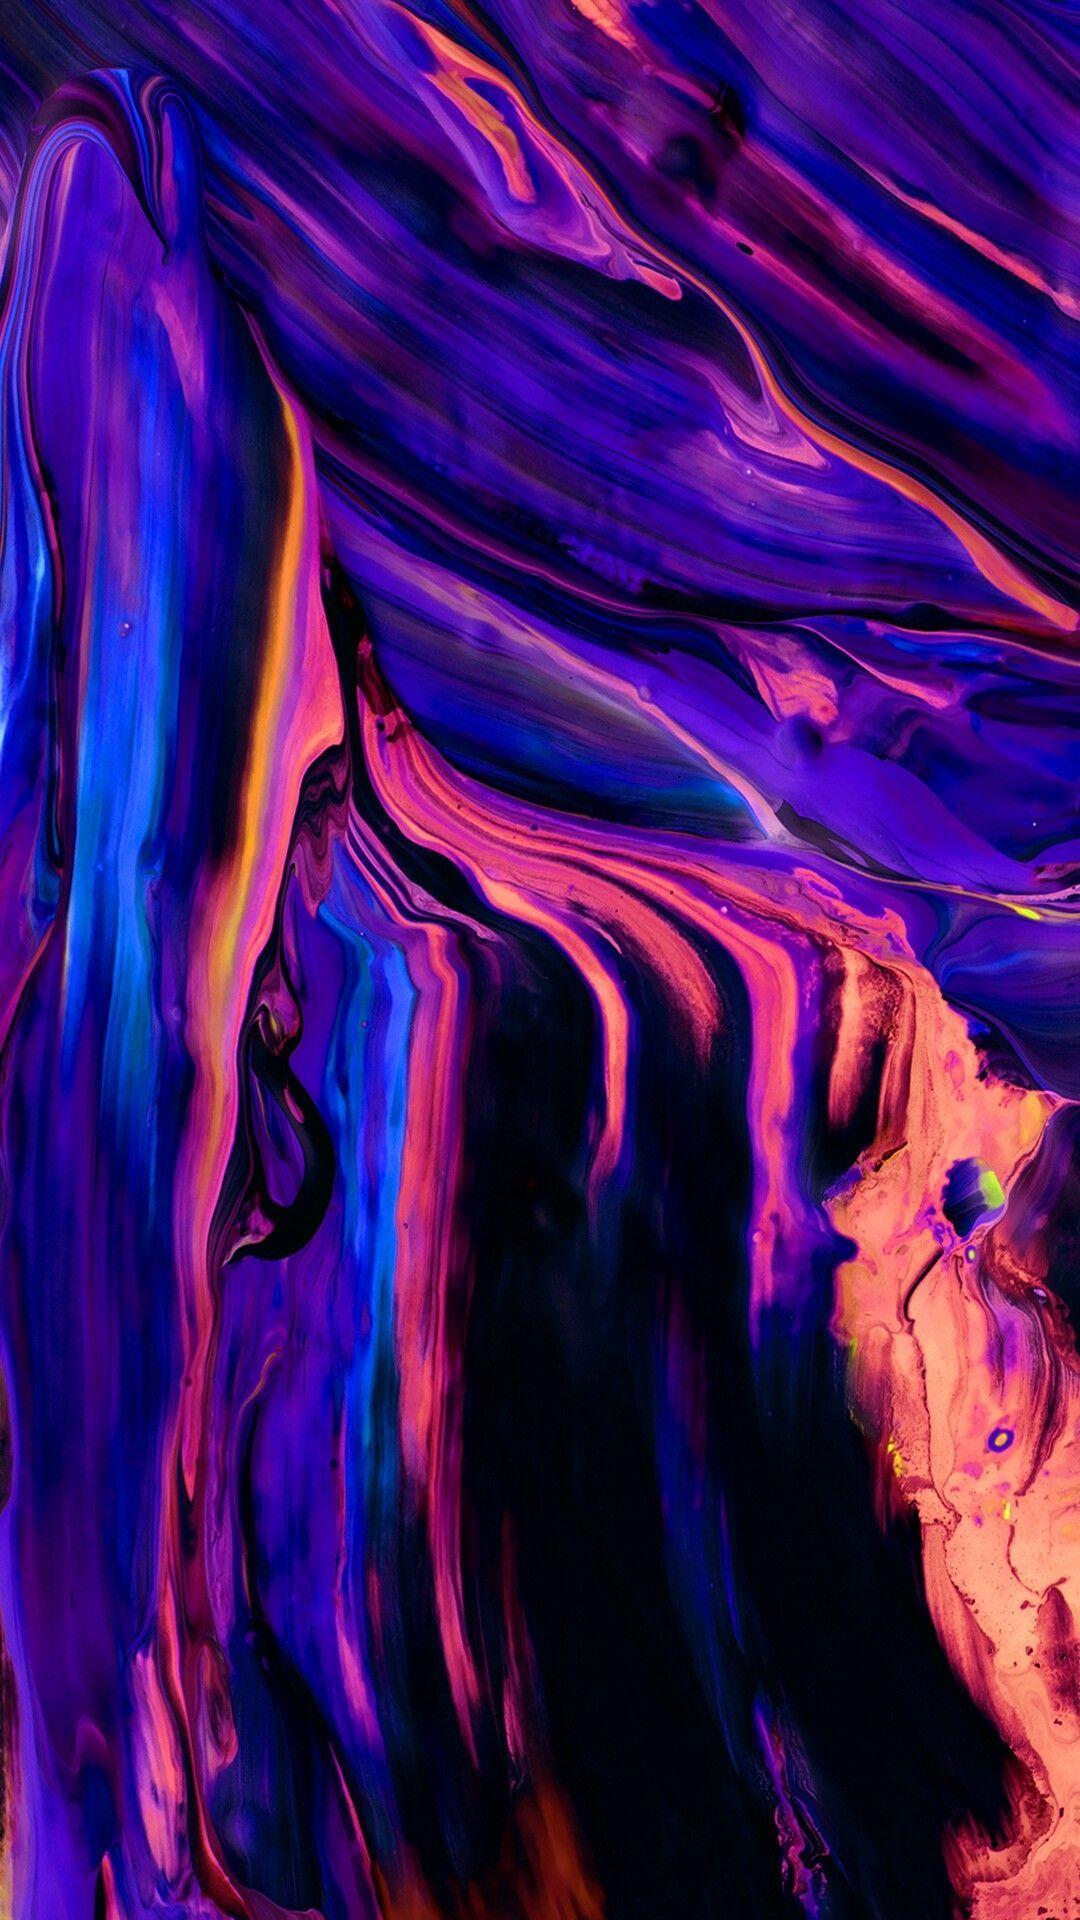 4k Abstract iPhone Wallpapers - Wallpaper Cave